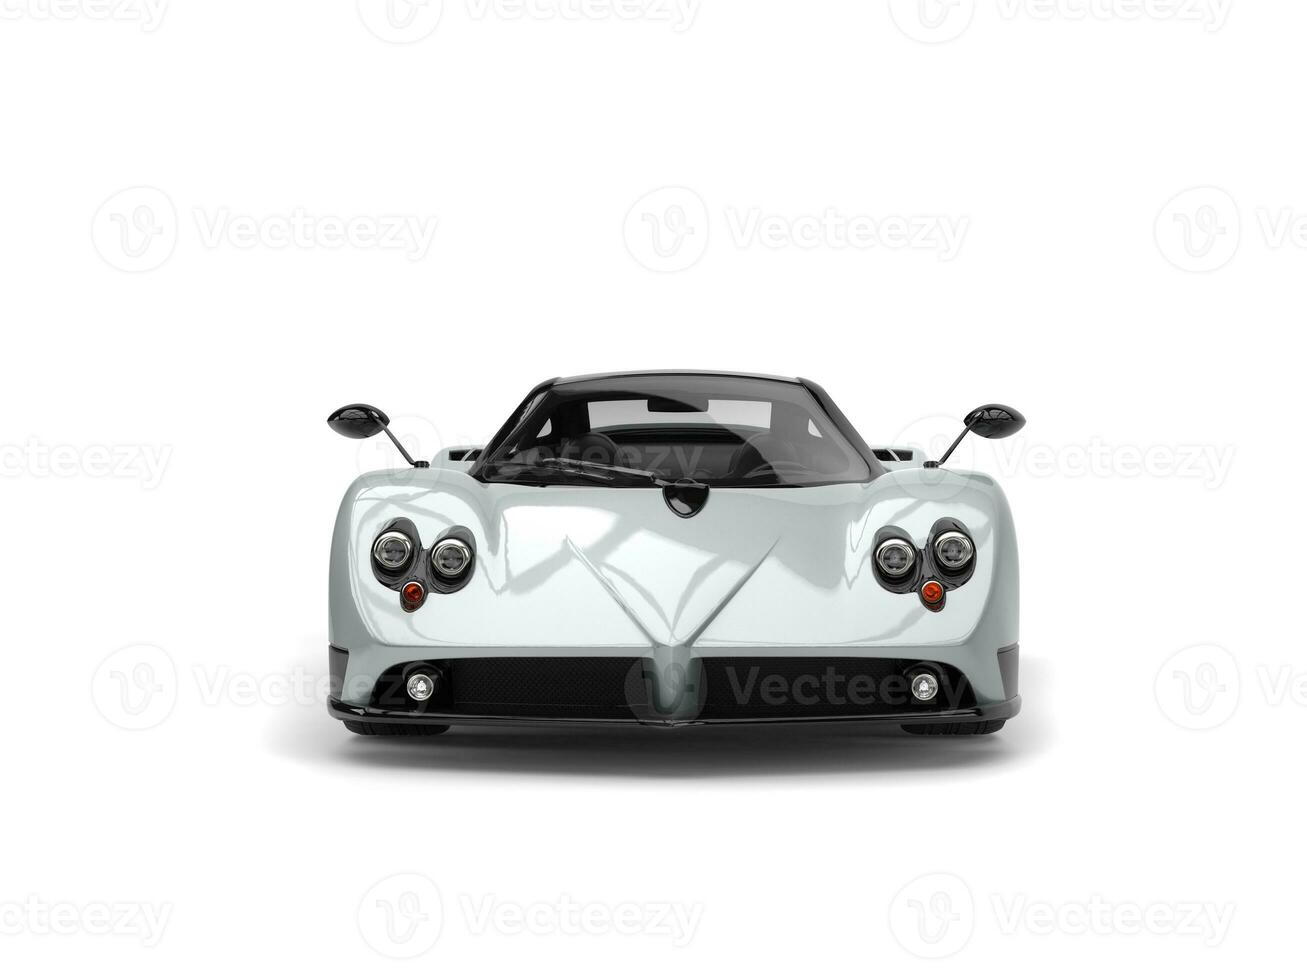 Luxury modern sports car - silver with black side panels - front view photo